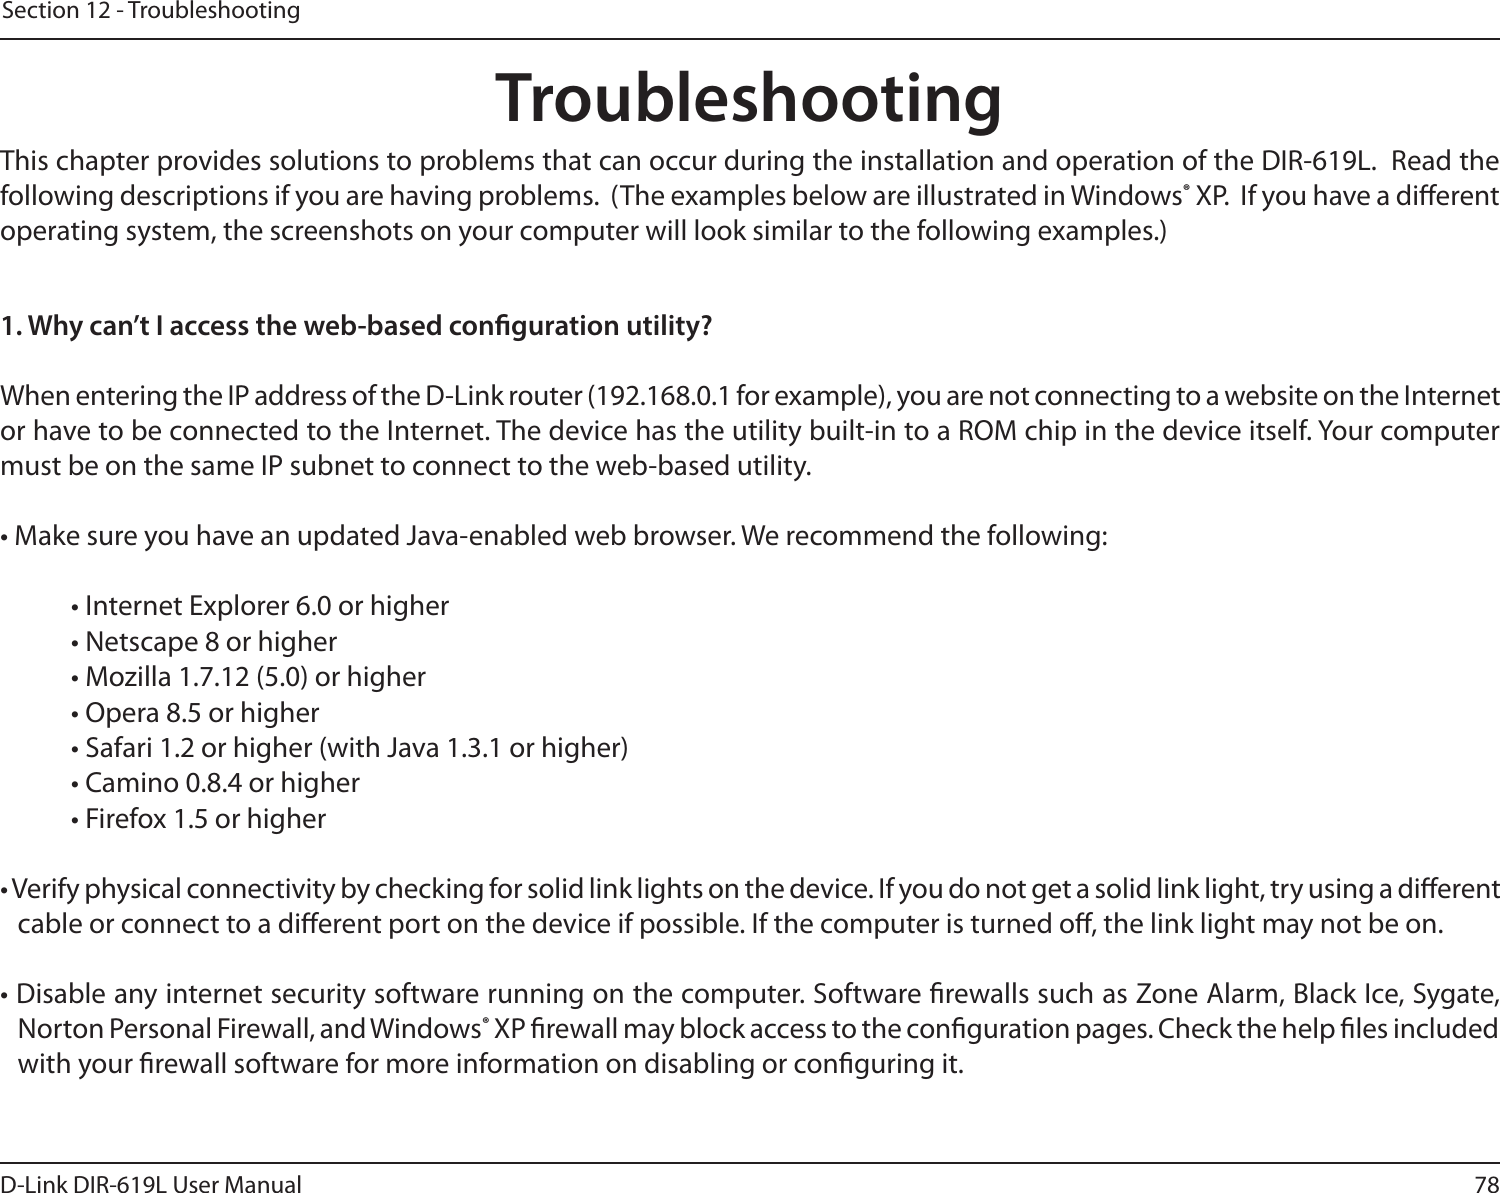 78D-Link DIR-619L User ManualSection 12 - TroubleshootingTroubleshootingThis chapter provides solutions to problems that can occur during the installation and operation of the DIR-619L.  Read the following descriptions if you are having problems.  (The examples below are illustrated in Windows® XP.  If you have a dierent operating system, the screenshots on your computer will look similar to the following examples.)1. Why can’t I access the web-based conguration utility?When entering the IP address of the D-Link router (192.168.0.1 for example), you are not connecting to a website on the Internet or have to be connected to the Internet. The device has the utility built-in to a ROM chip in the device itself. Your computer must be on the same IP subnet to connect to the web-based utility. • Make sure you have an updated Java-enabled web browser. We recommend the following: • Internet Explorer 6.0 or higher • Netscape 8 or higher • Mozilla 1.7.12 (5.0) or higher • Opera 8.5 or higher • Safari 1.2 or higher (with Java 1.3.1 or higher) • Camino 0.8.4 or higher • Firefox 1.5 or higher • Verify physical connectivity by checking for solid link lights on the device. If you do not get a solid link light, try using a dierent cable or connect to a dierent port on the device if possible. If the computer is turned o, the link light may not be on.• Disable any internet security software running on the computer. Software rewalls such as Zone Alarm, Black Ice, Sygate, Norton Personal Firewall, and Windows® XP rewall may block access to the conguration pages. Check the help les included with your rewall software for more information on disabling or conguring it.